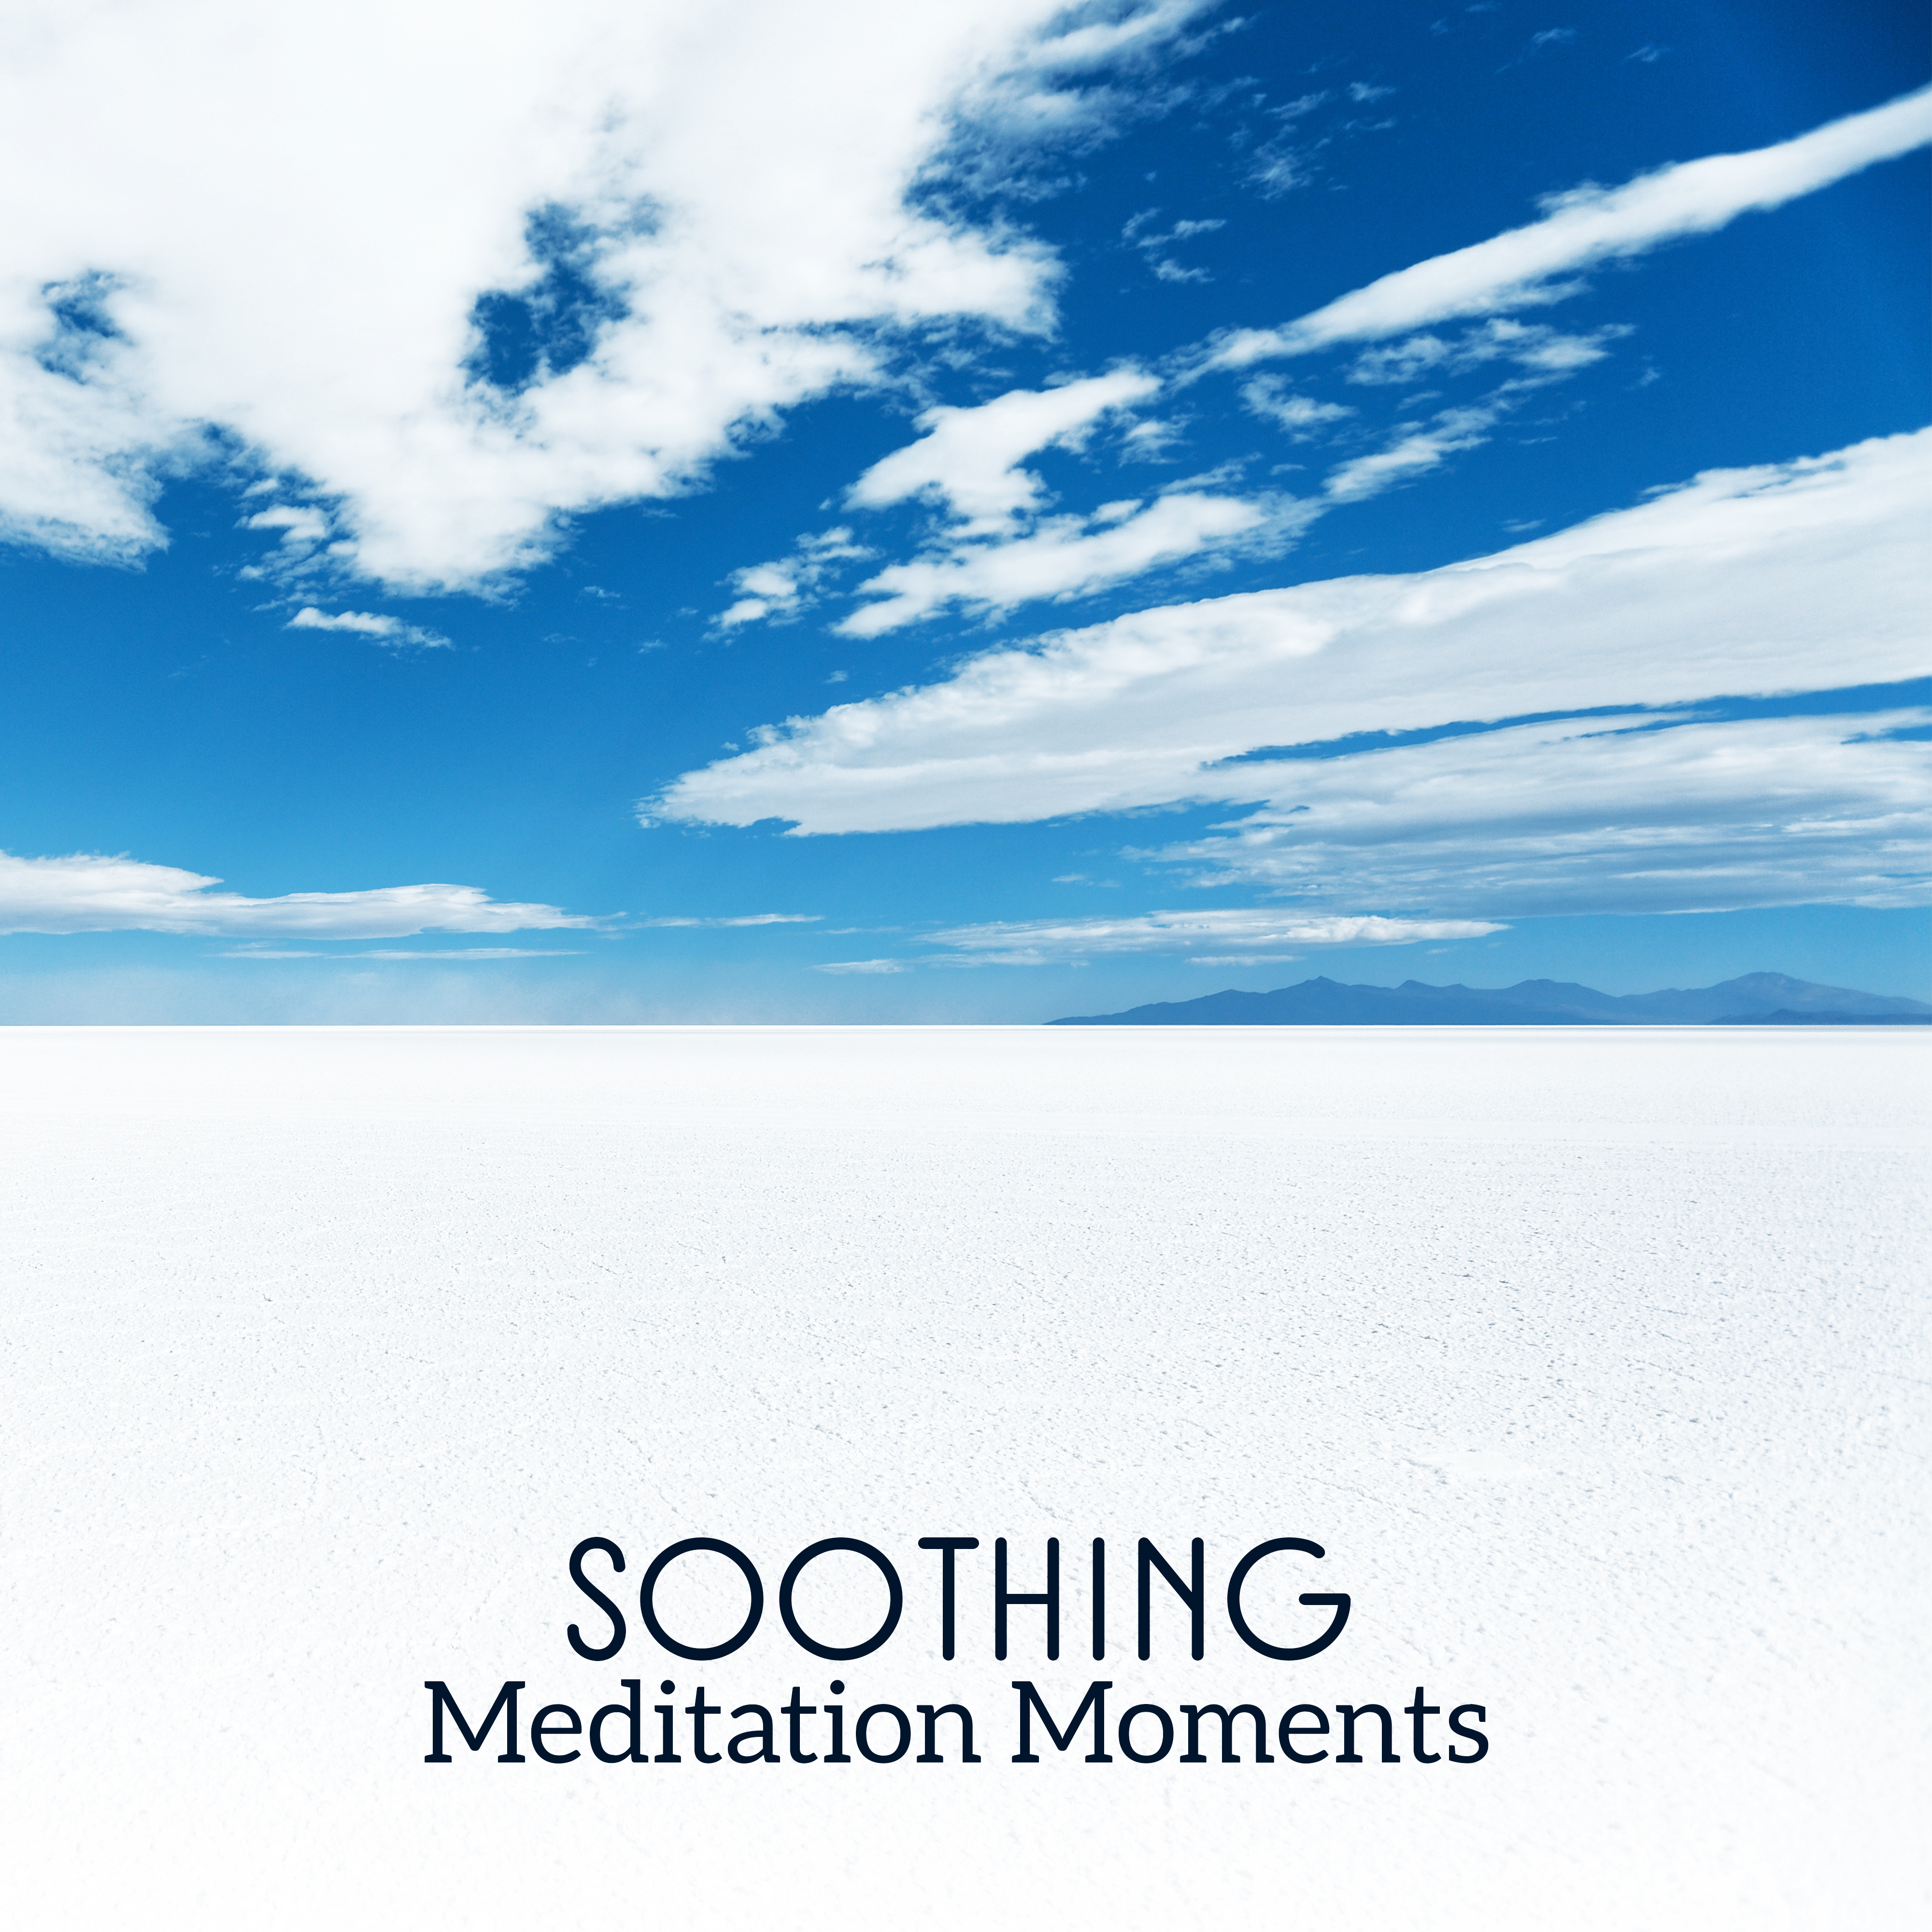 Soothing Meditation Moments